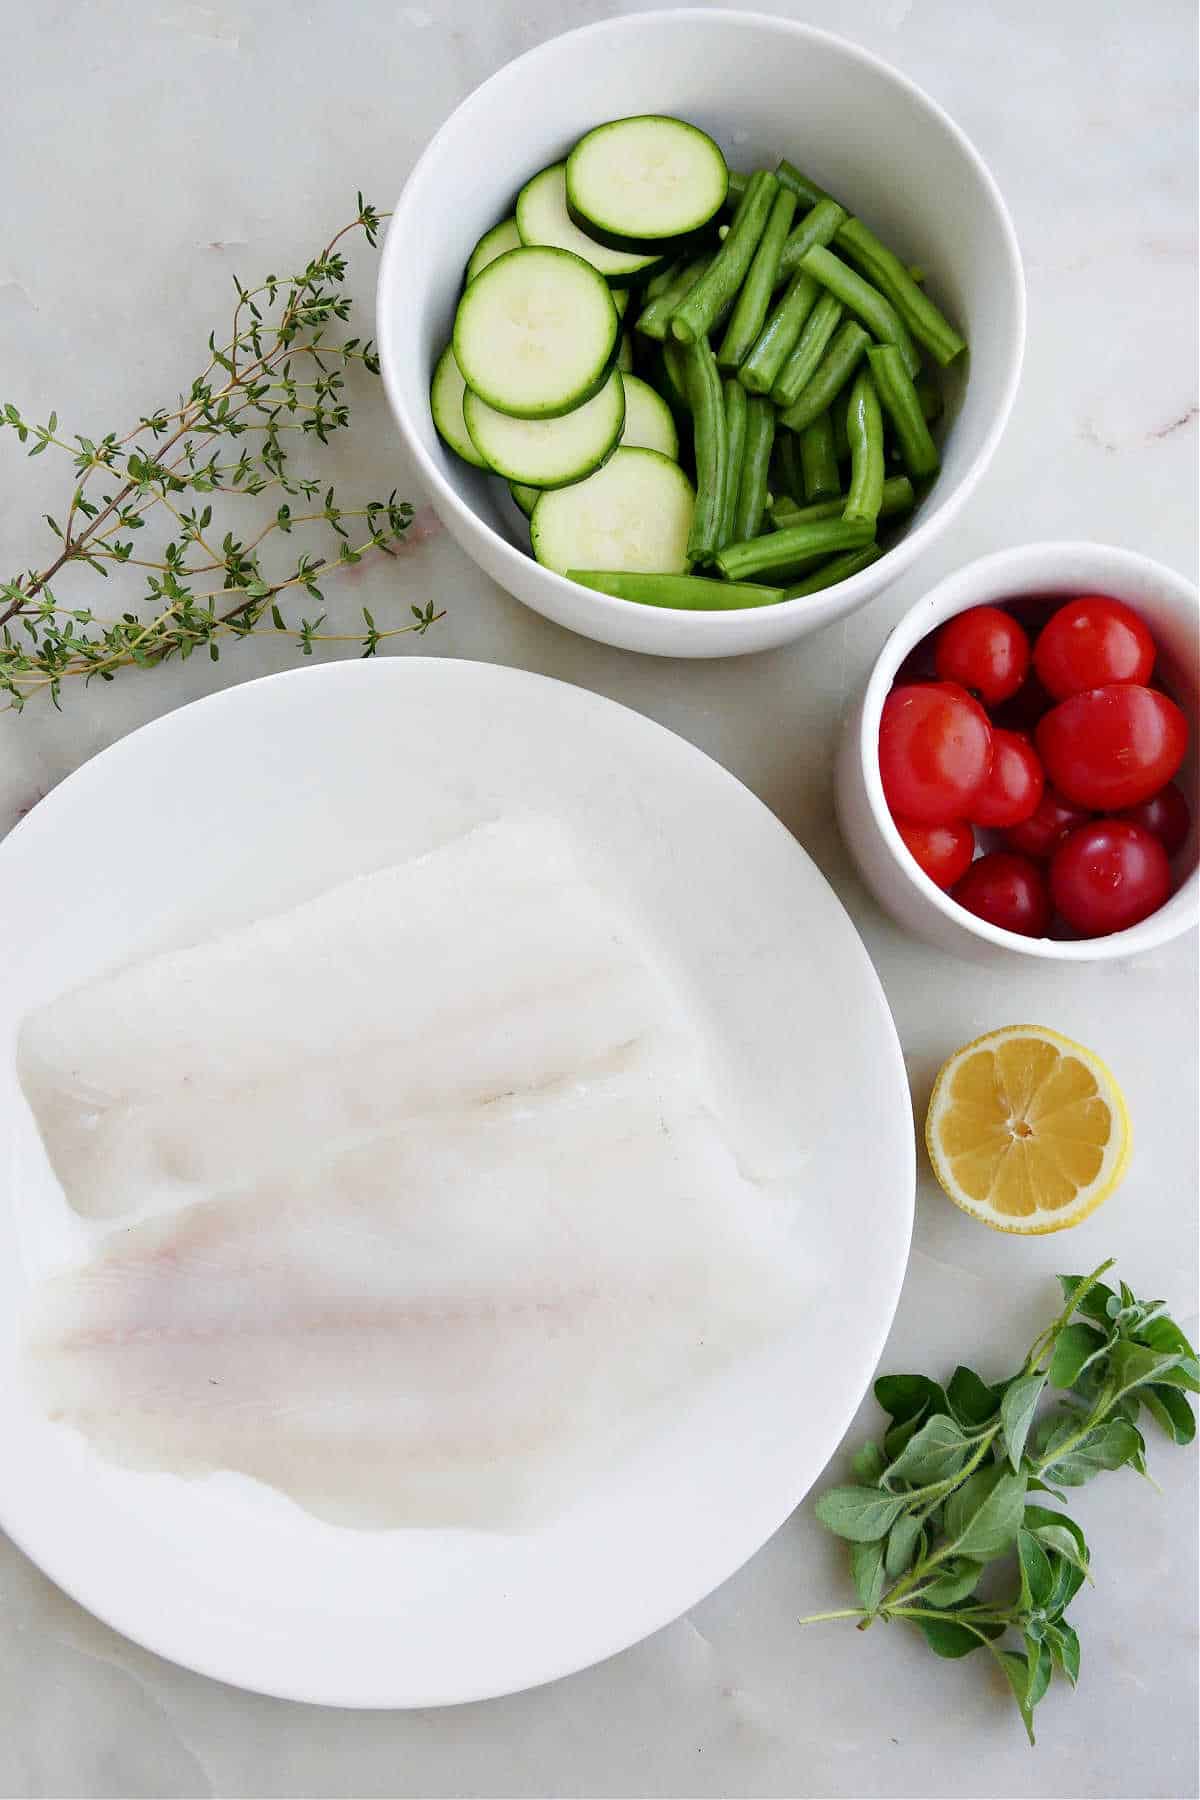 cod fillets, vegetables, lemon, and herbs spread out next to each other on a counter